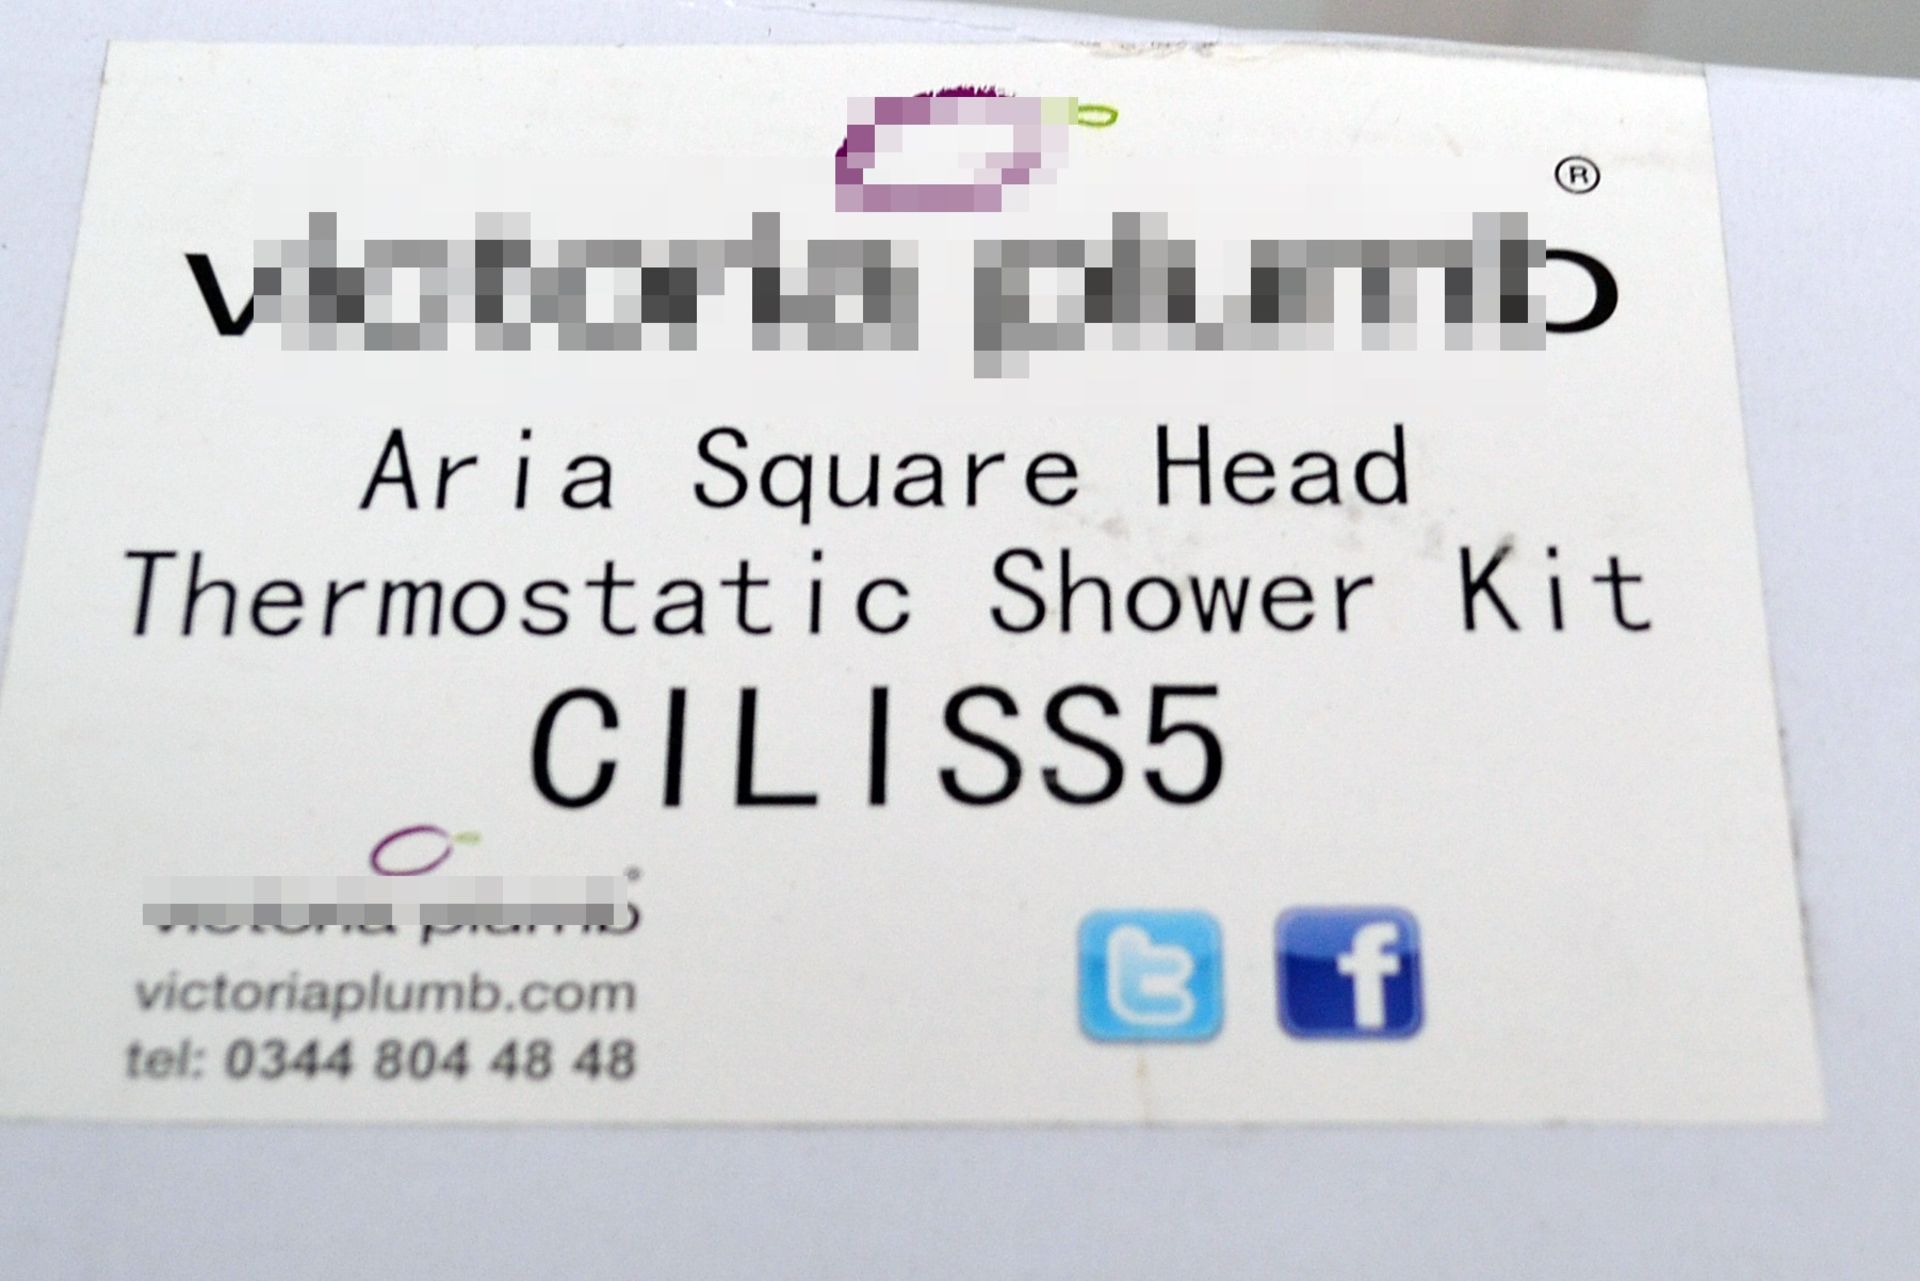 1 x ARIA Square Head Thermostatic Shower Kit - Chrome - CILISS5 - Ref: MBI003 - CL190 - Location: - Image 2 of 12